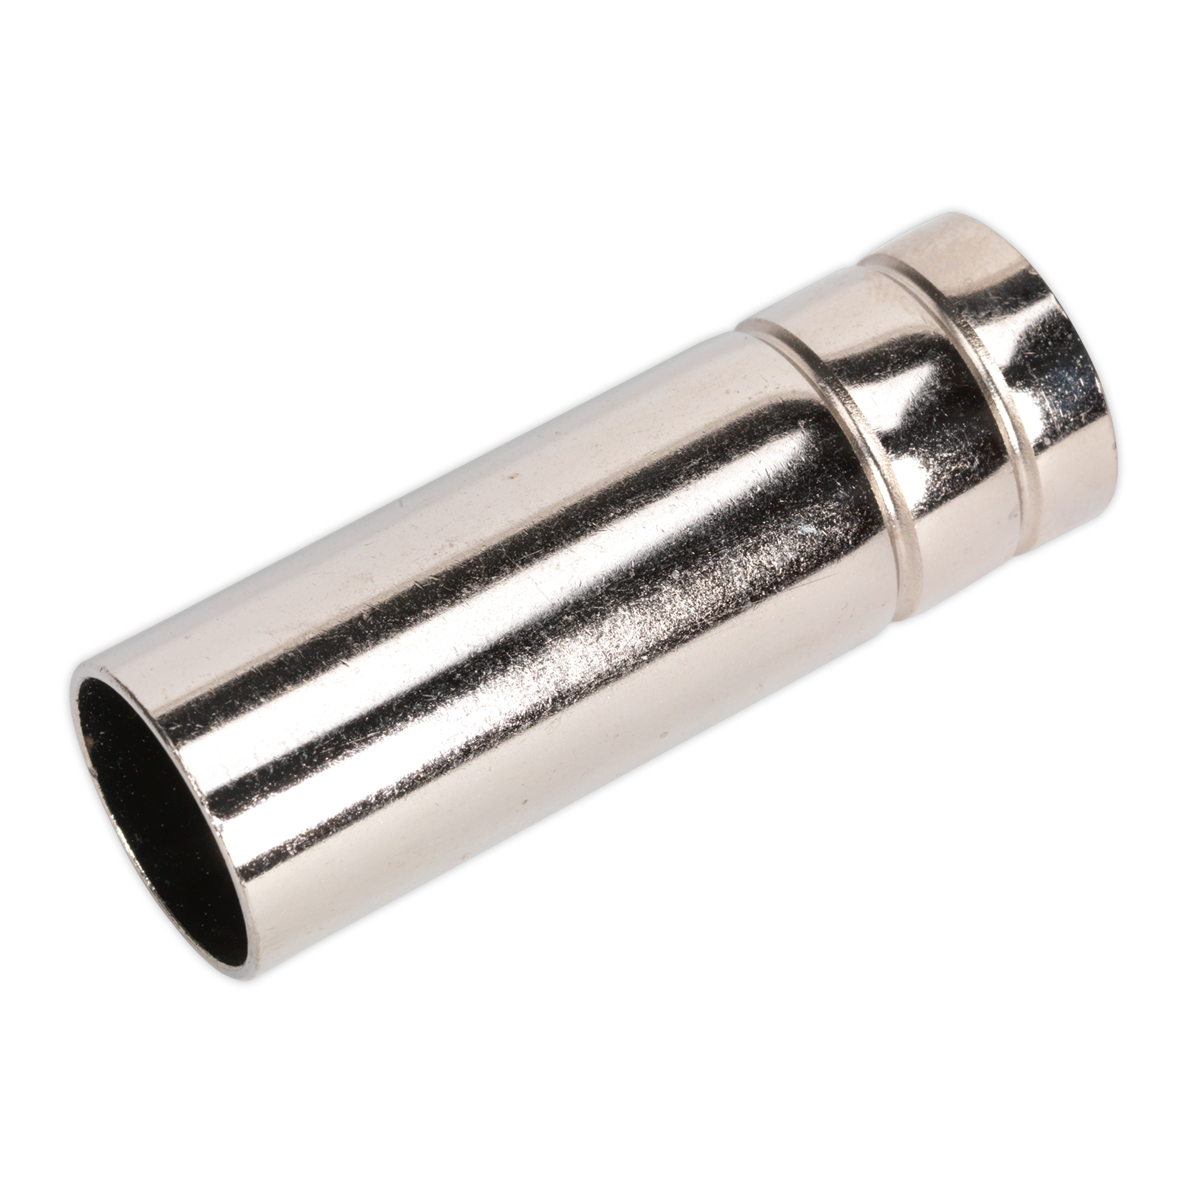 Sealey Cylindrical Nozzle MB15 Single (formerly 120/722149)